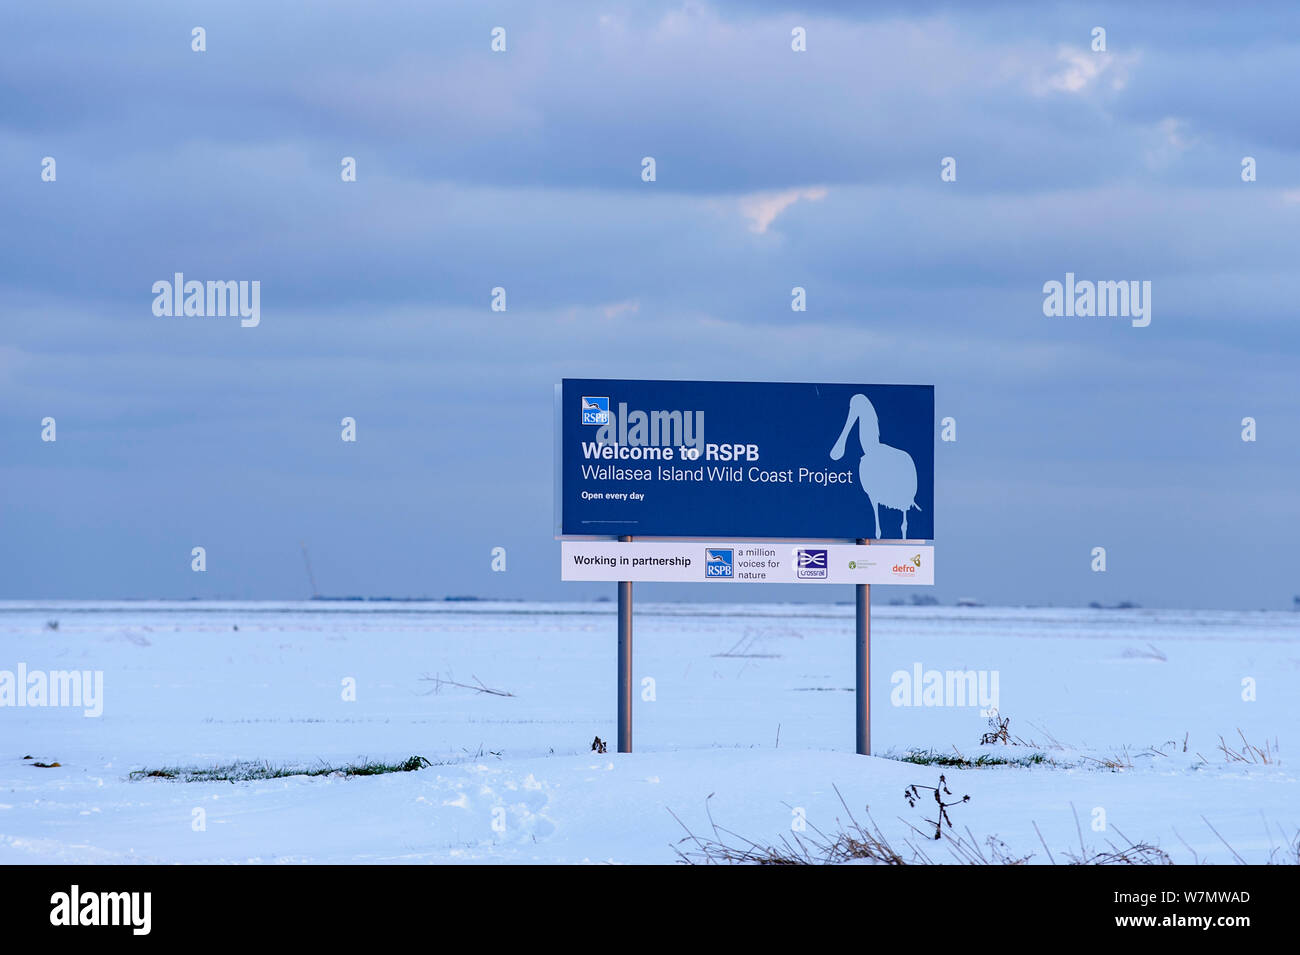 RSPB sign in snow for Wallasea Island Wild Coast Project, Essex, England, UK, February. Stock Photo